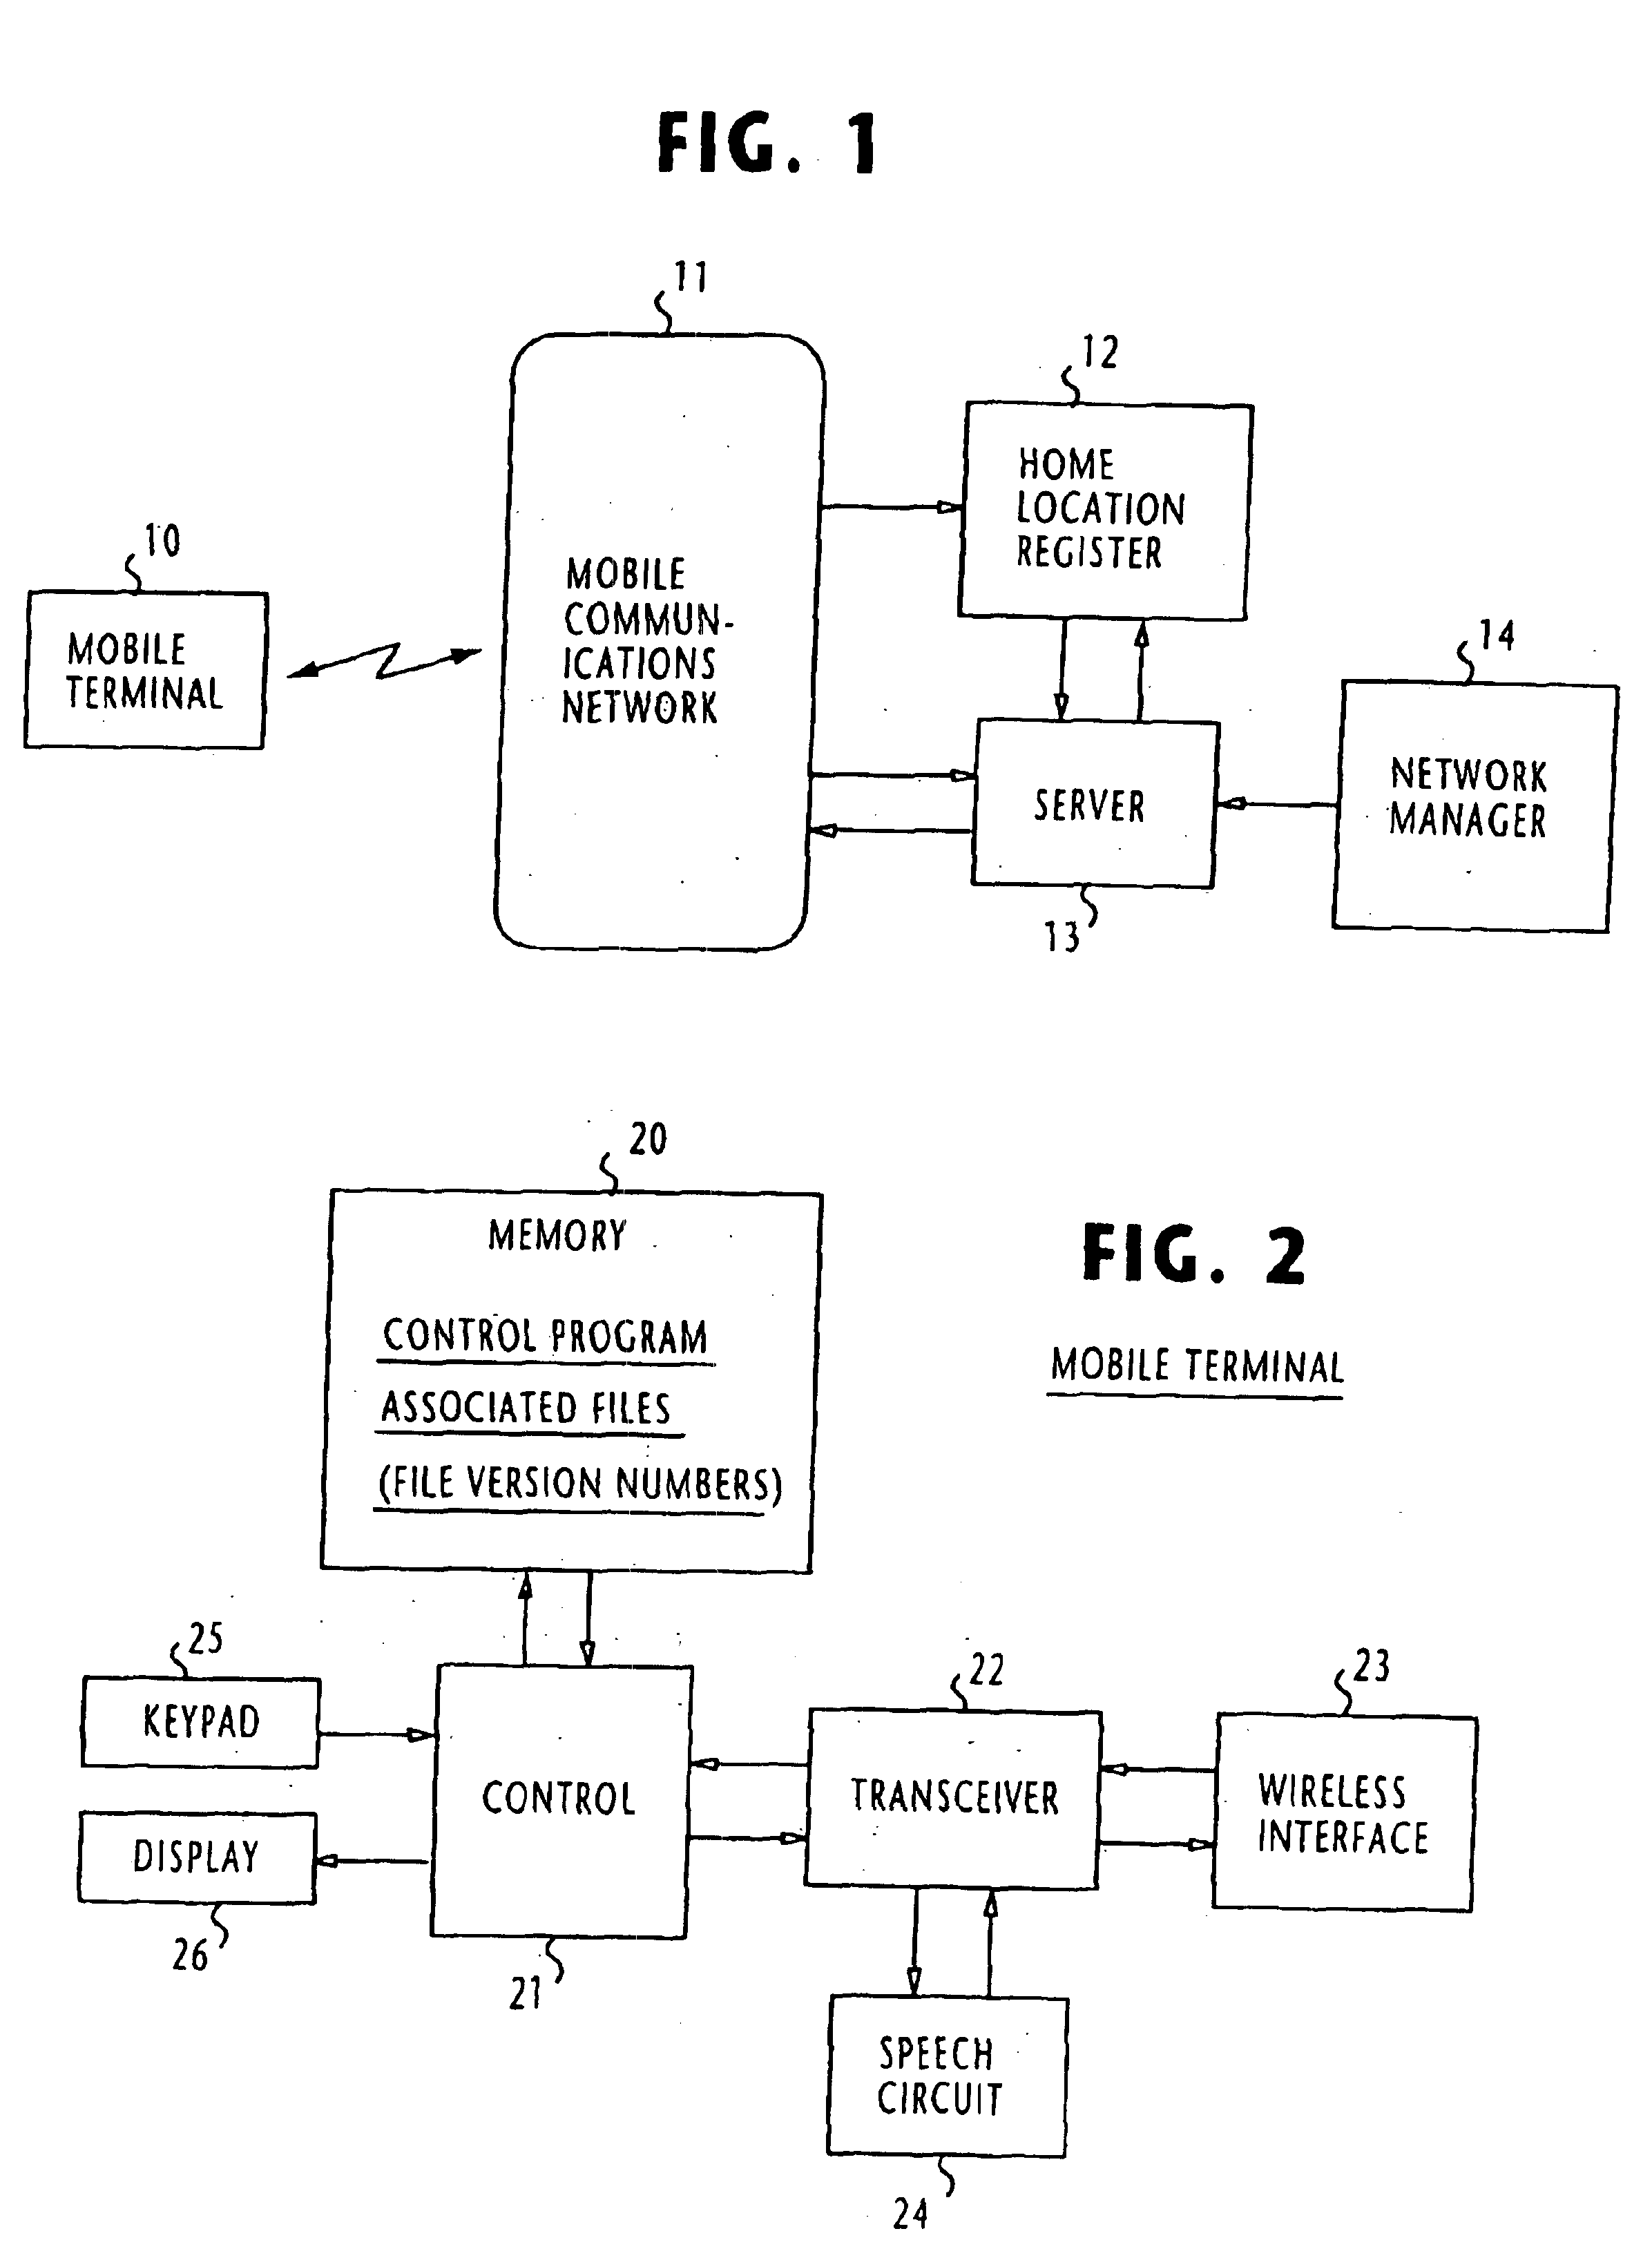 Method of updating client's installed data in response to a user-triggered event